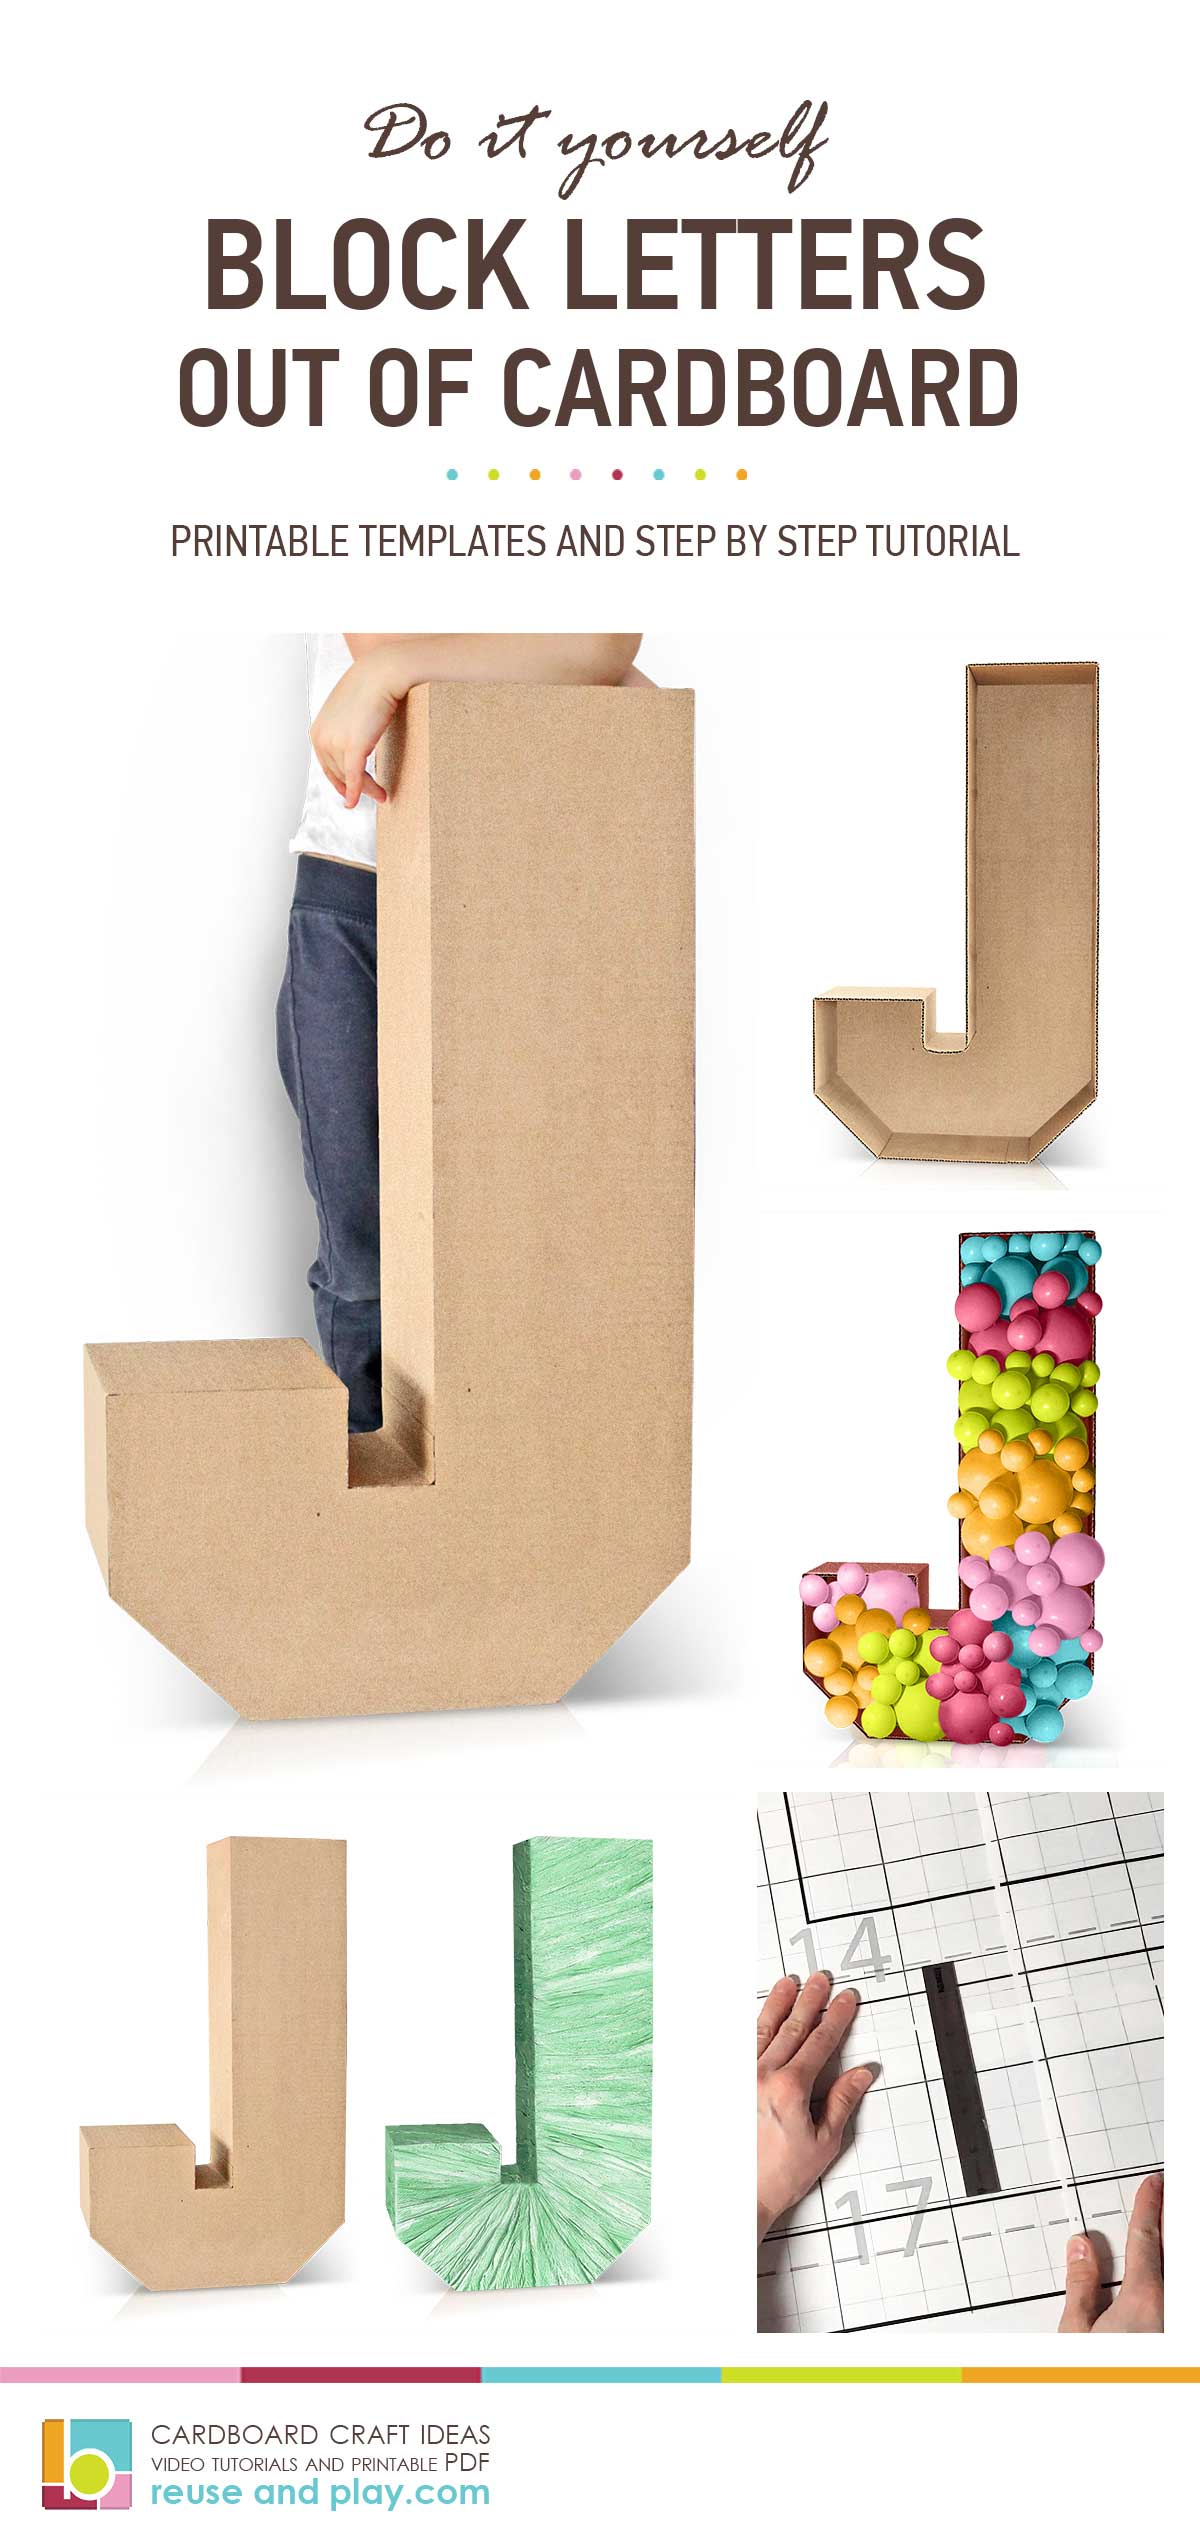 How to make Large Letters Templates and Tutorials